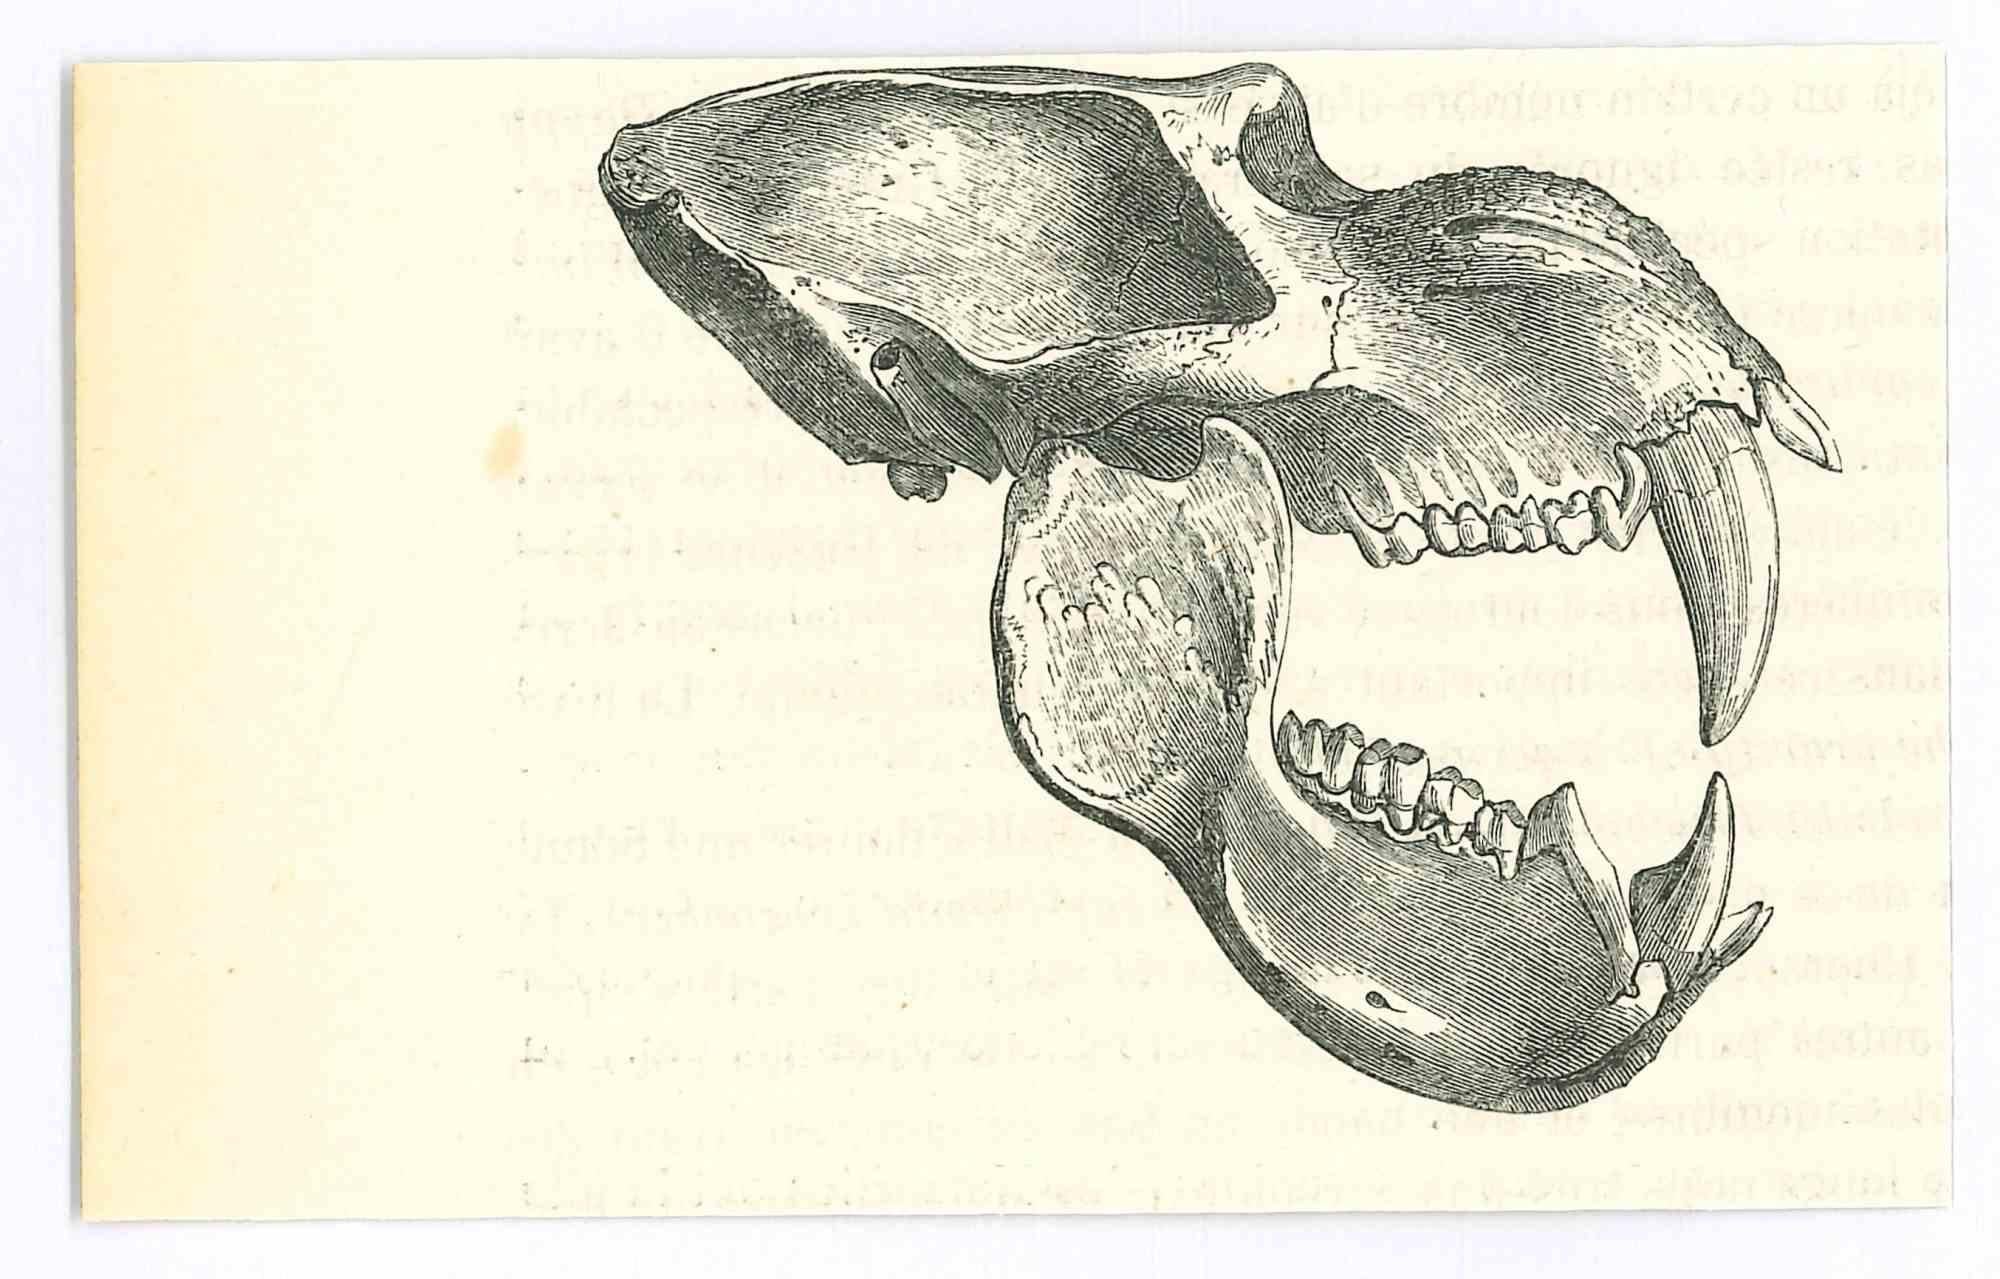 The Skull - Original Lithograph by Paul Gervais - 1854